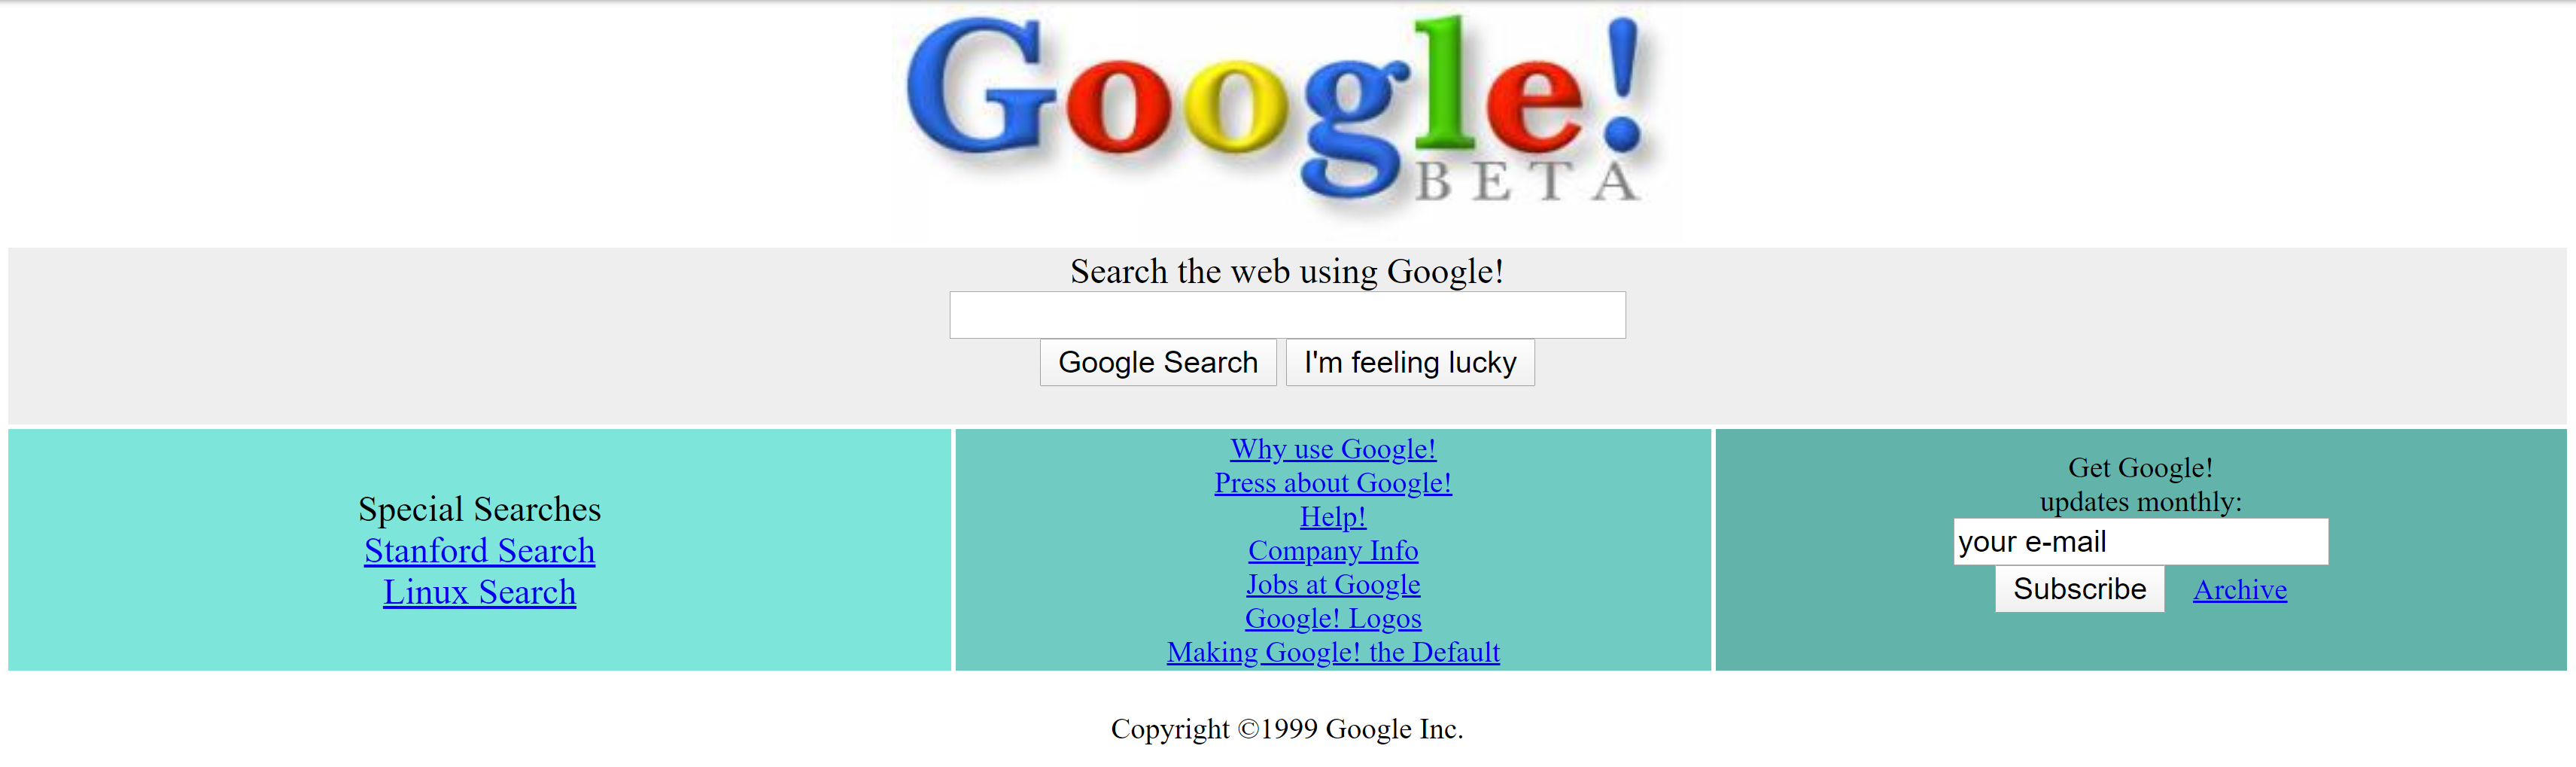 Screen shot from the Wayback machine showing early Google design